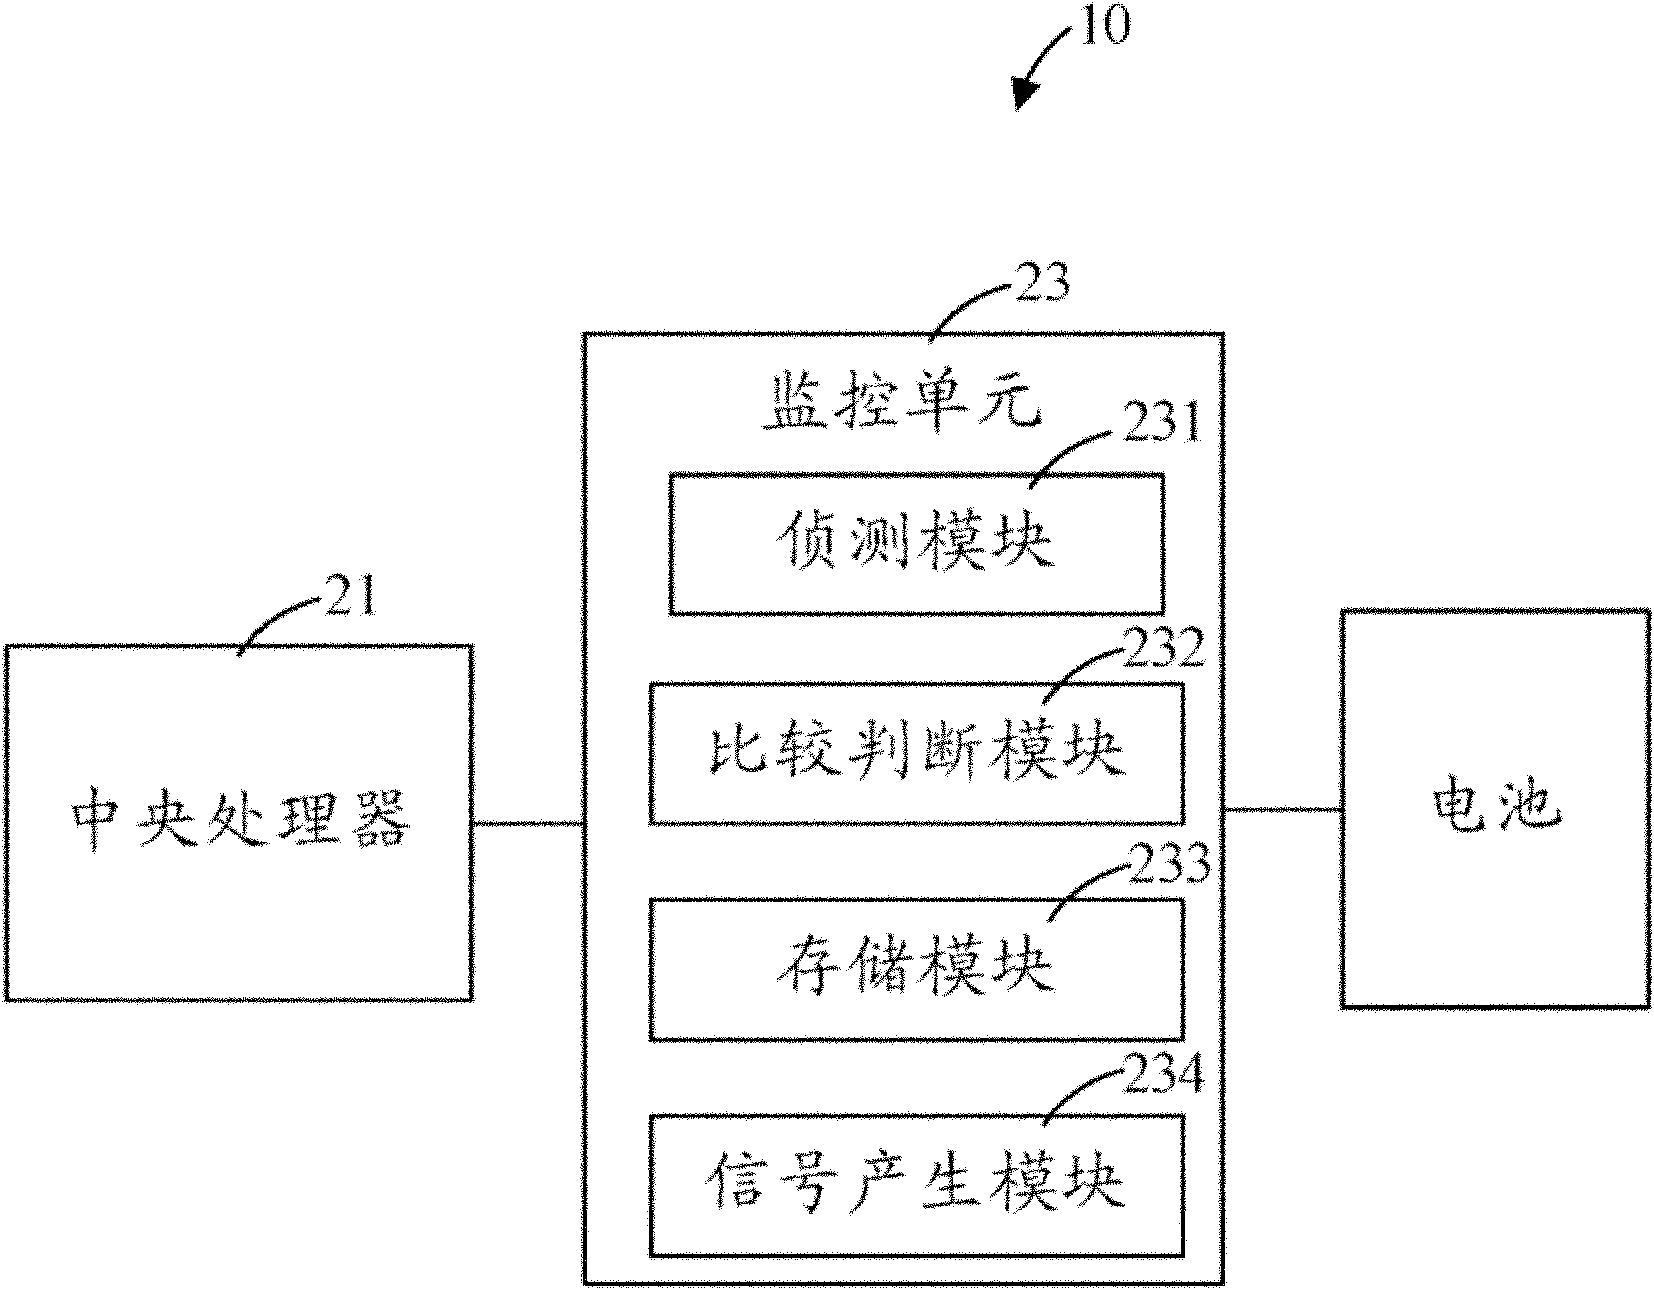 Electronic device with sleep function and method for wakening same